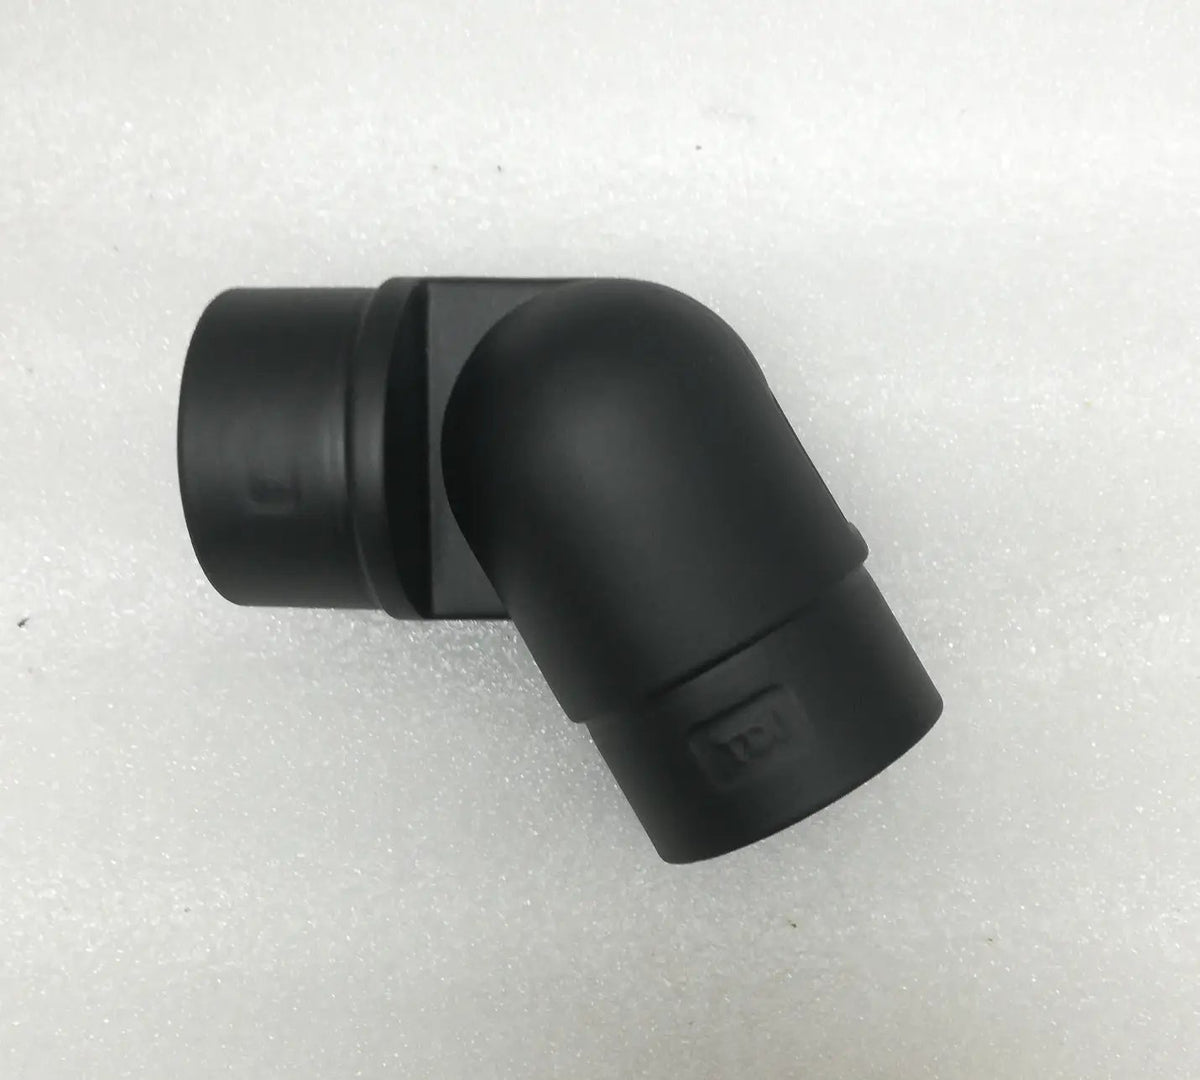 Adjustable Curved Elbow For 2" OD Tubing - Trade Diversified